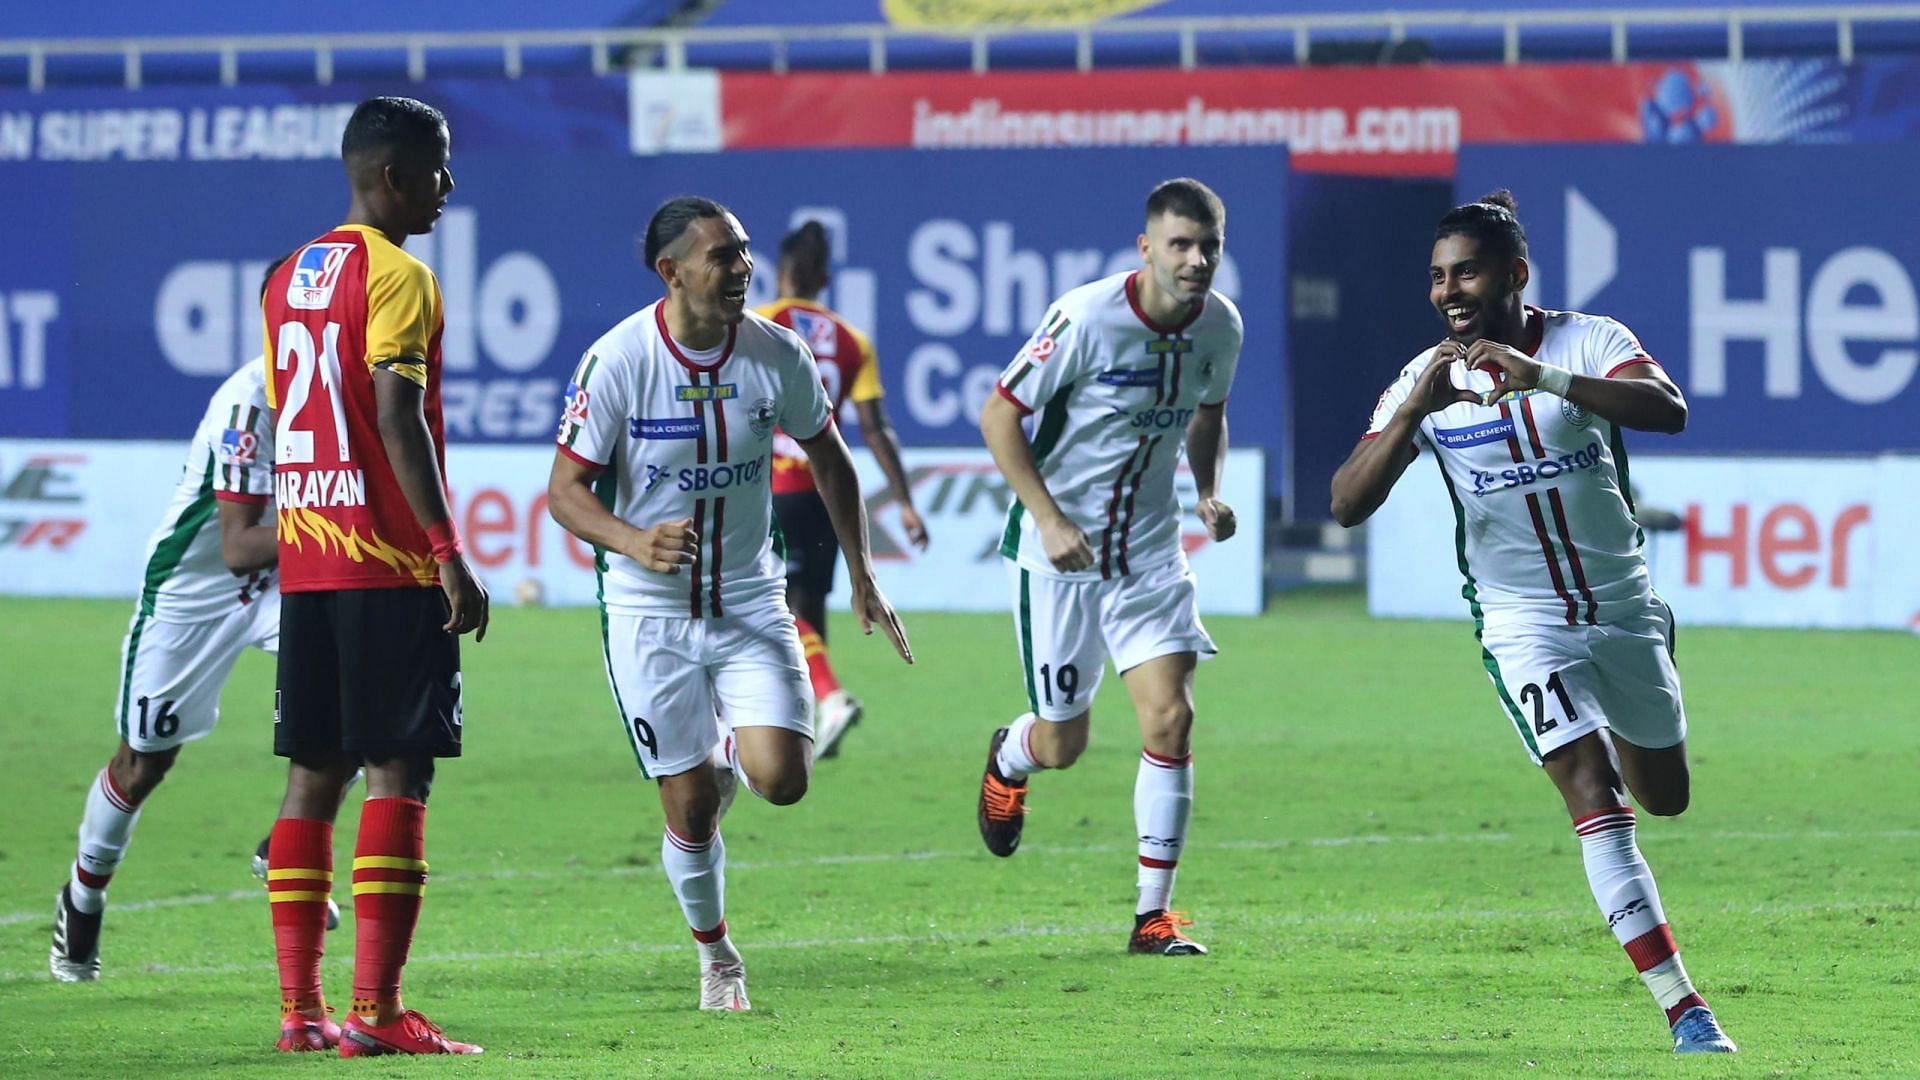 ATK Mohun Bagan did the double over SC East Bengal the previous season. (Image: ISL)